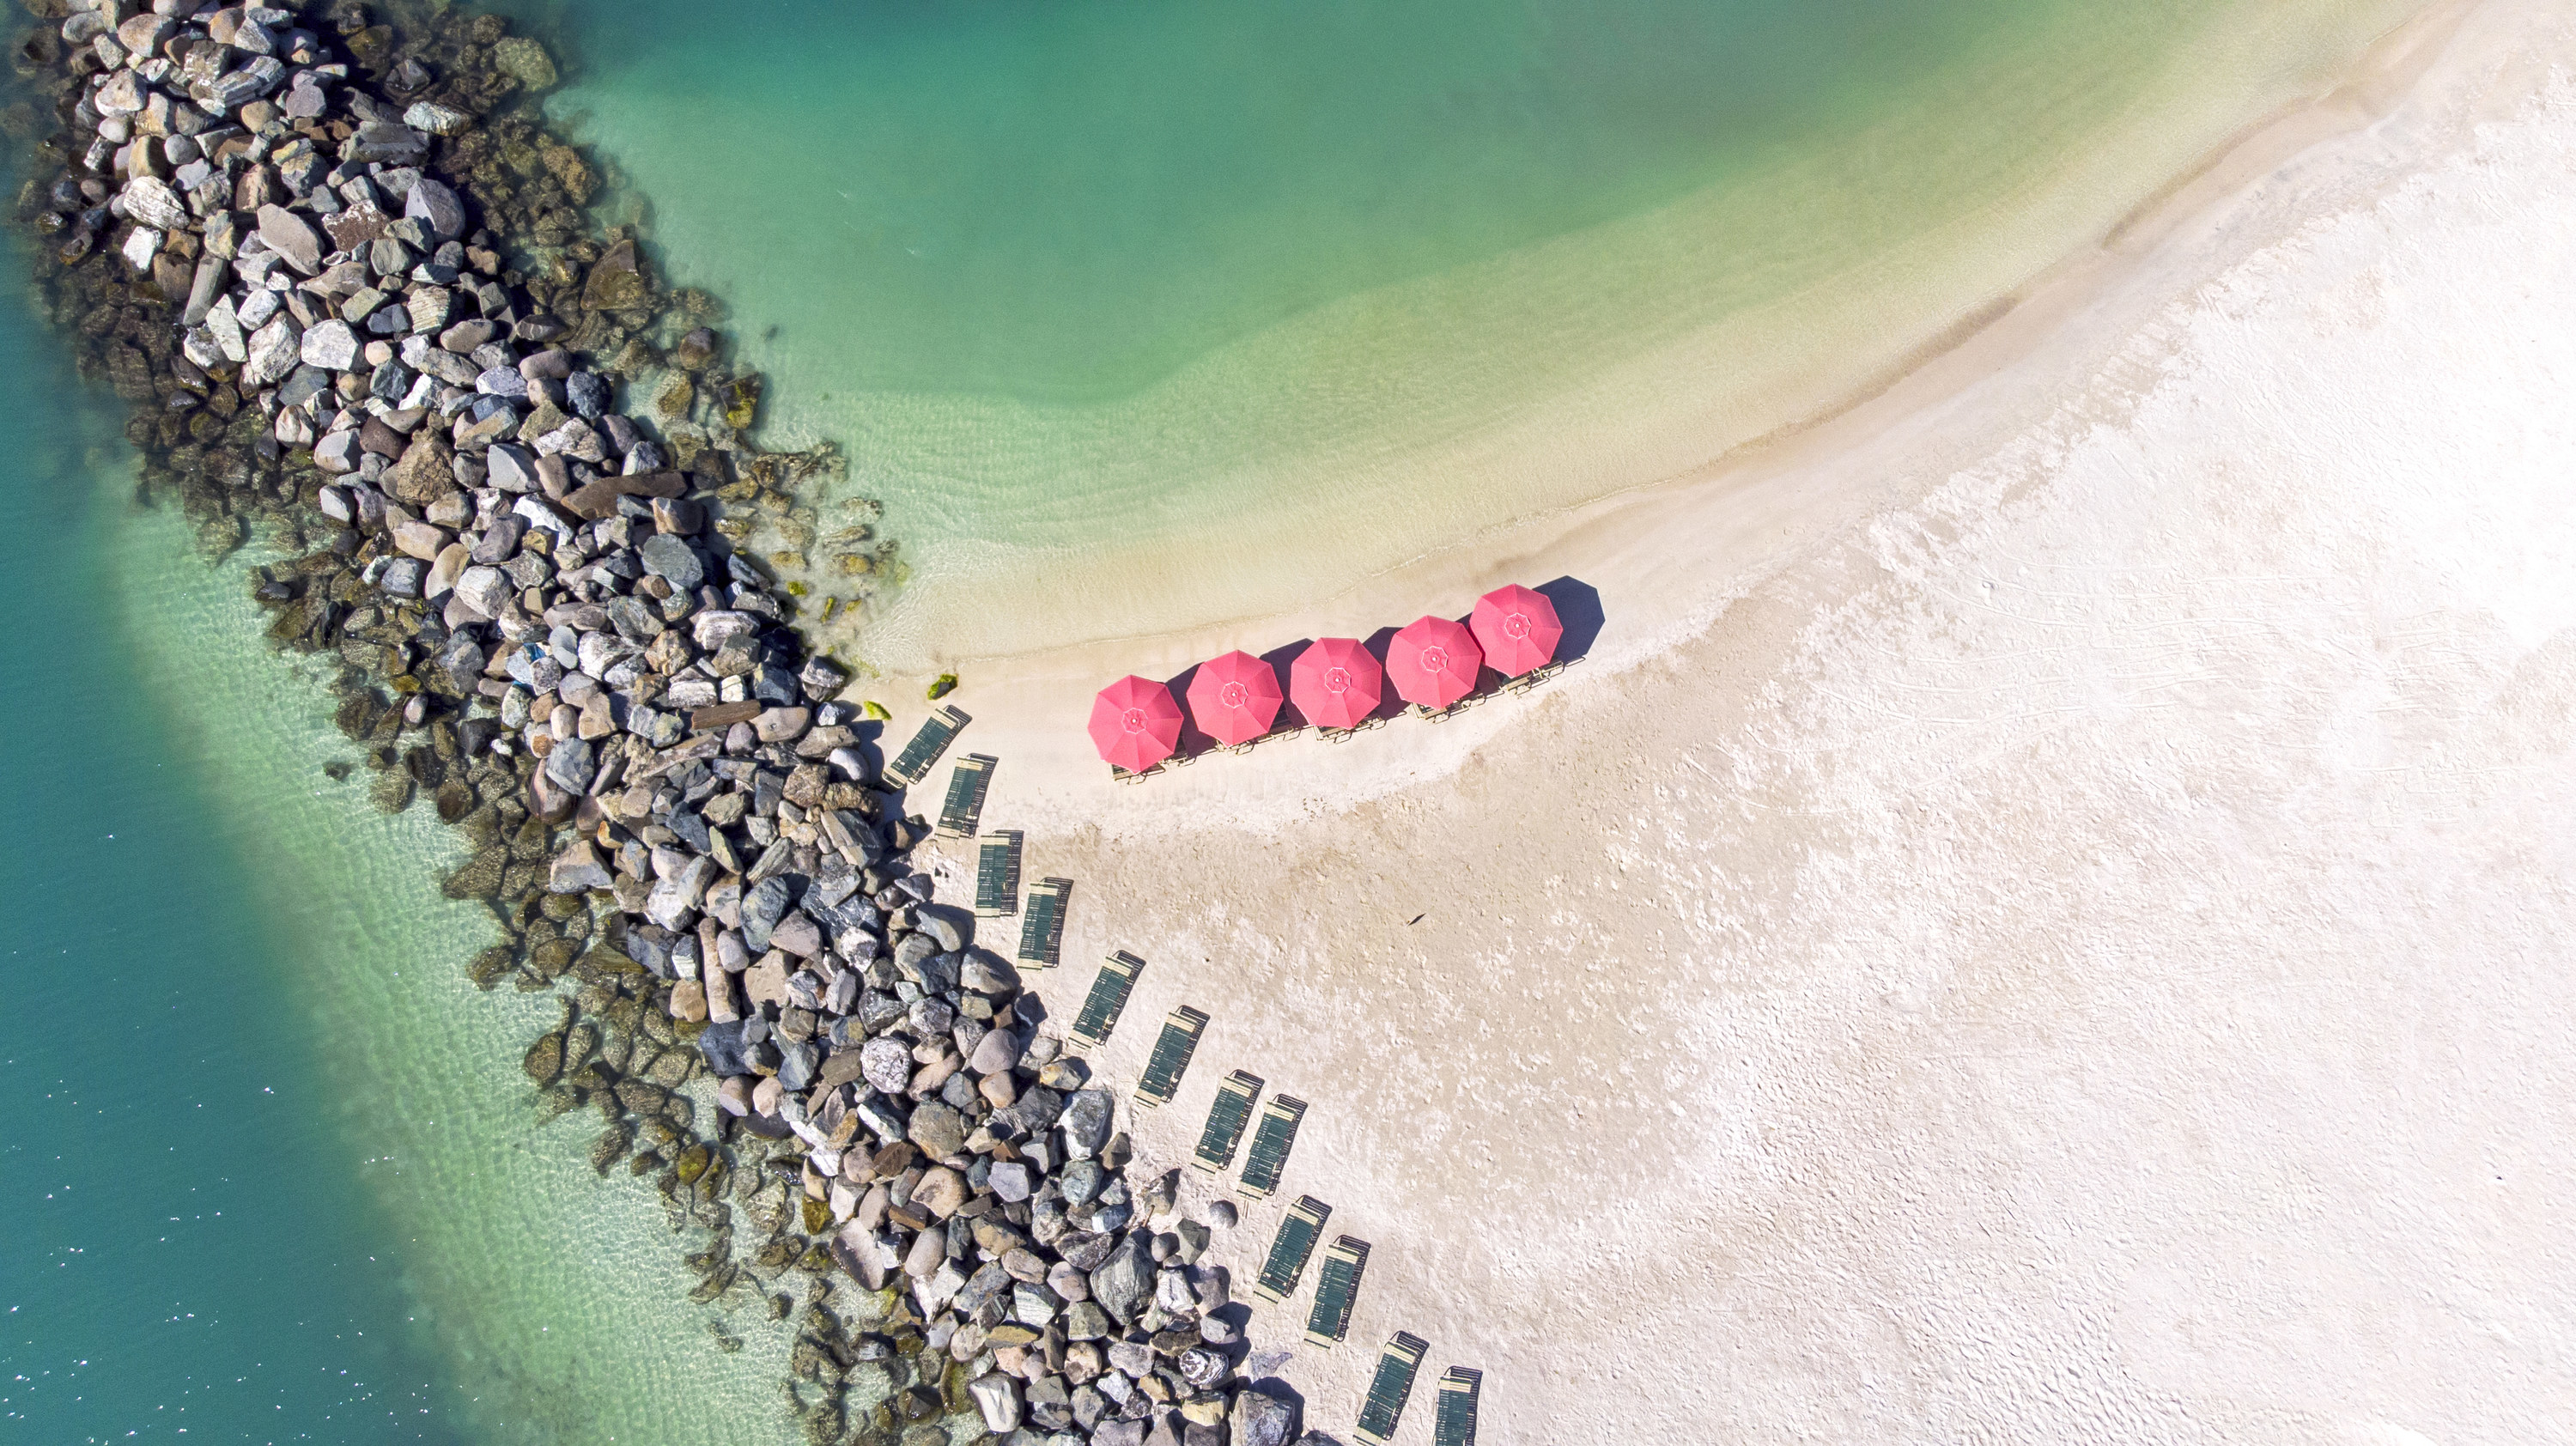 Aerial view of parasol and su beds on the sandy beach in St Maarten